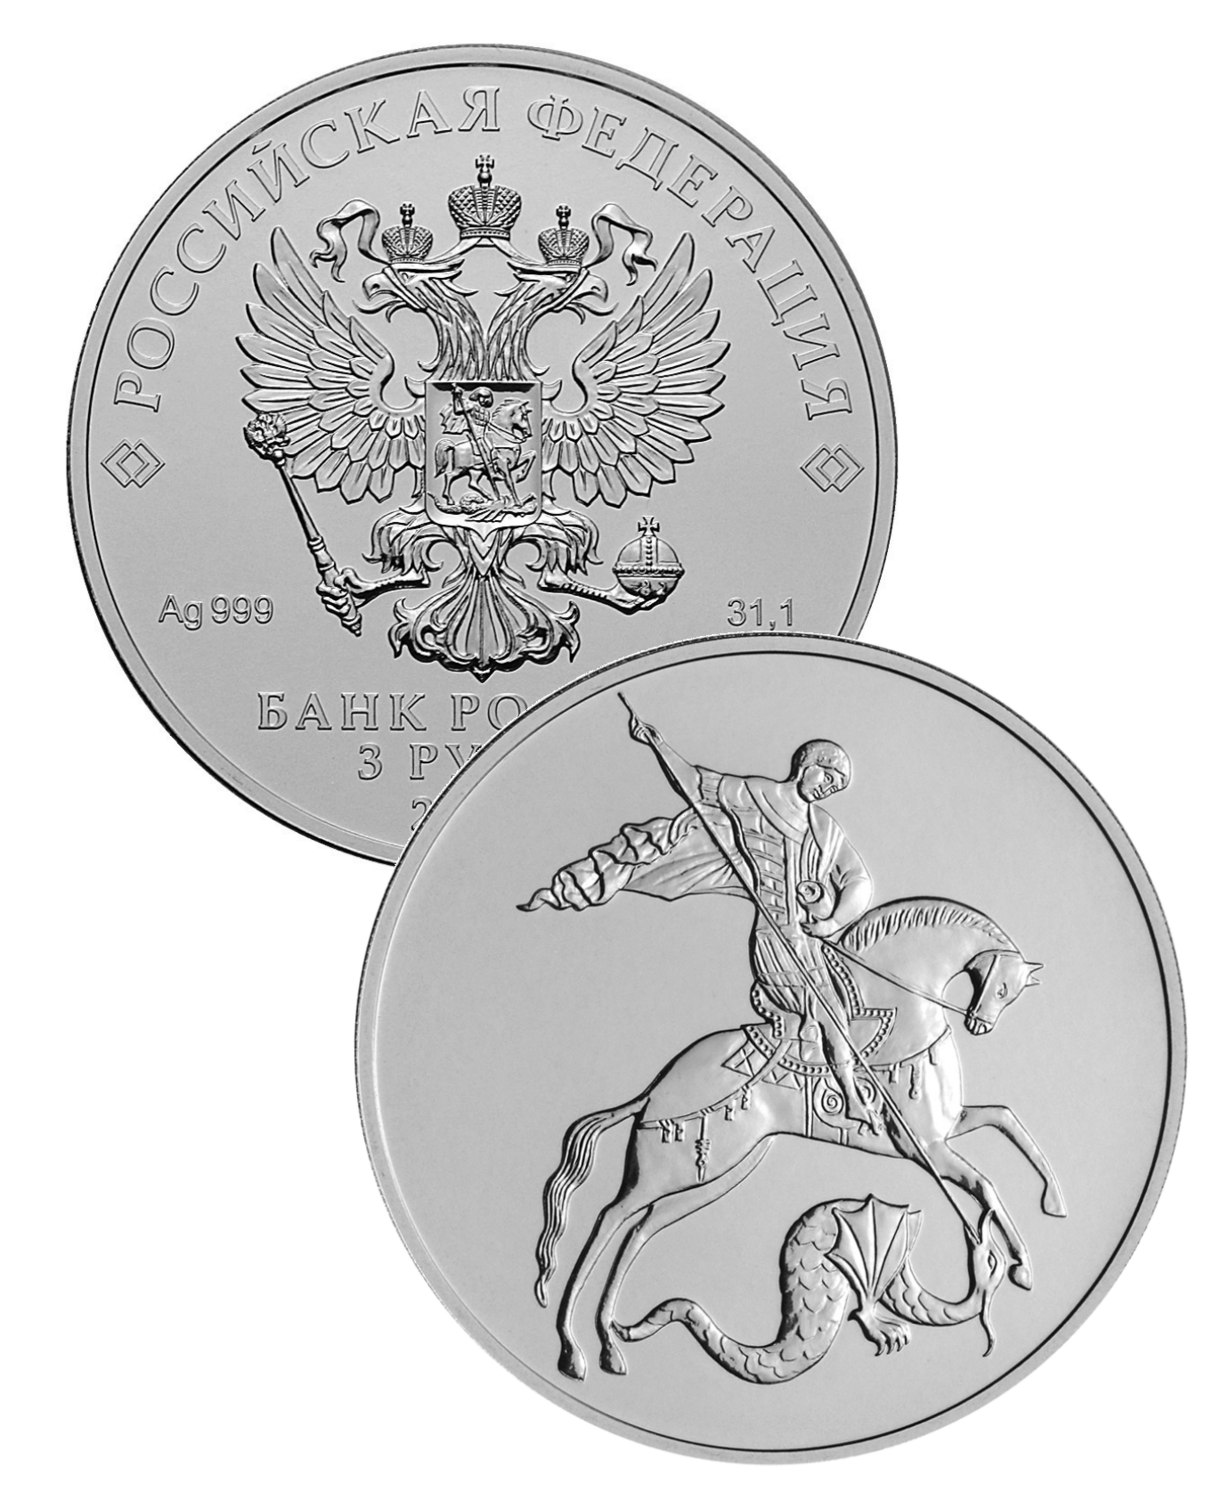 Russia. 2020. 3 Rubles. MMD. George the Victorious. 0.999 Silver 1.00 Oz, ASW., 31.50 g. UNC. Mintage: <300,000